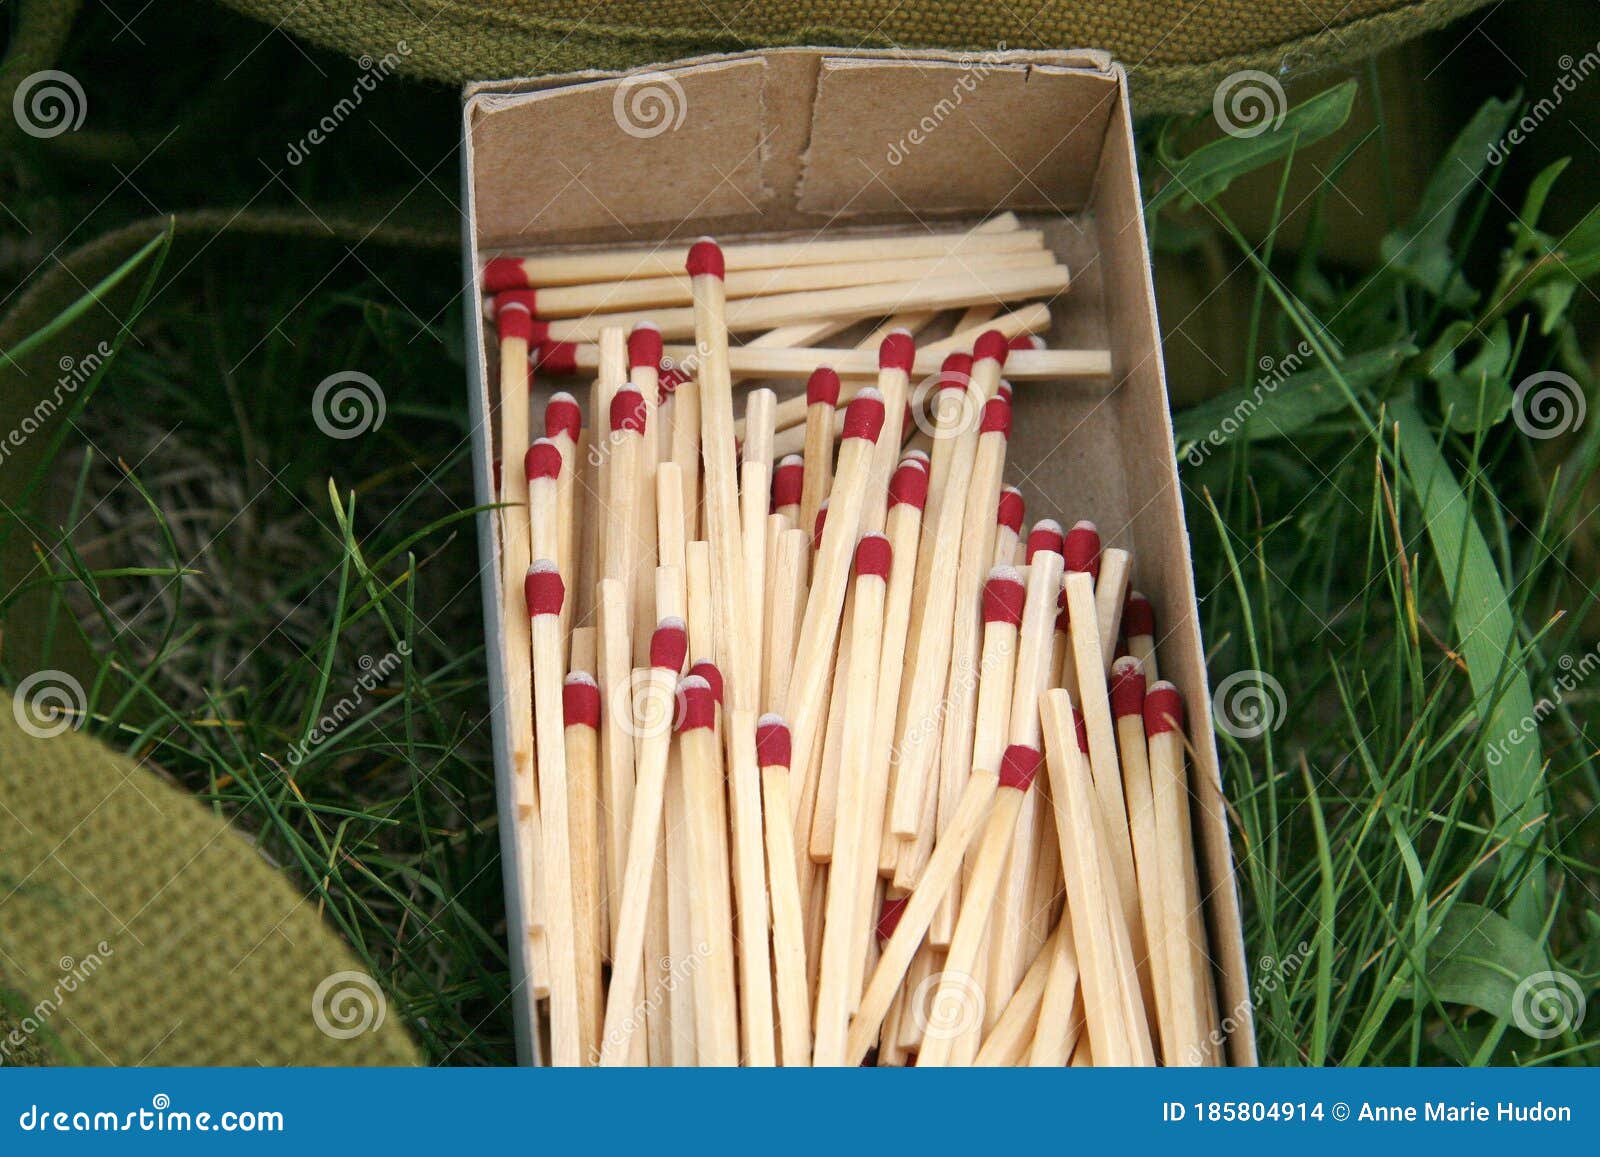 Box of Matches in the Grass Survival Wild Camping Nature Equipment Outdoor Northern Forest Stock Photo - Image of activity, survival: 185804914